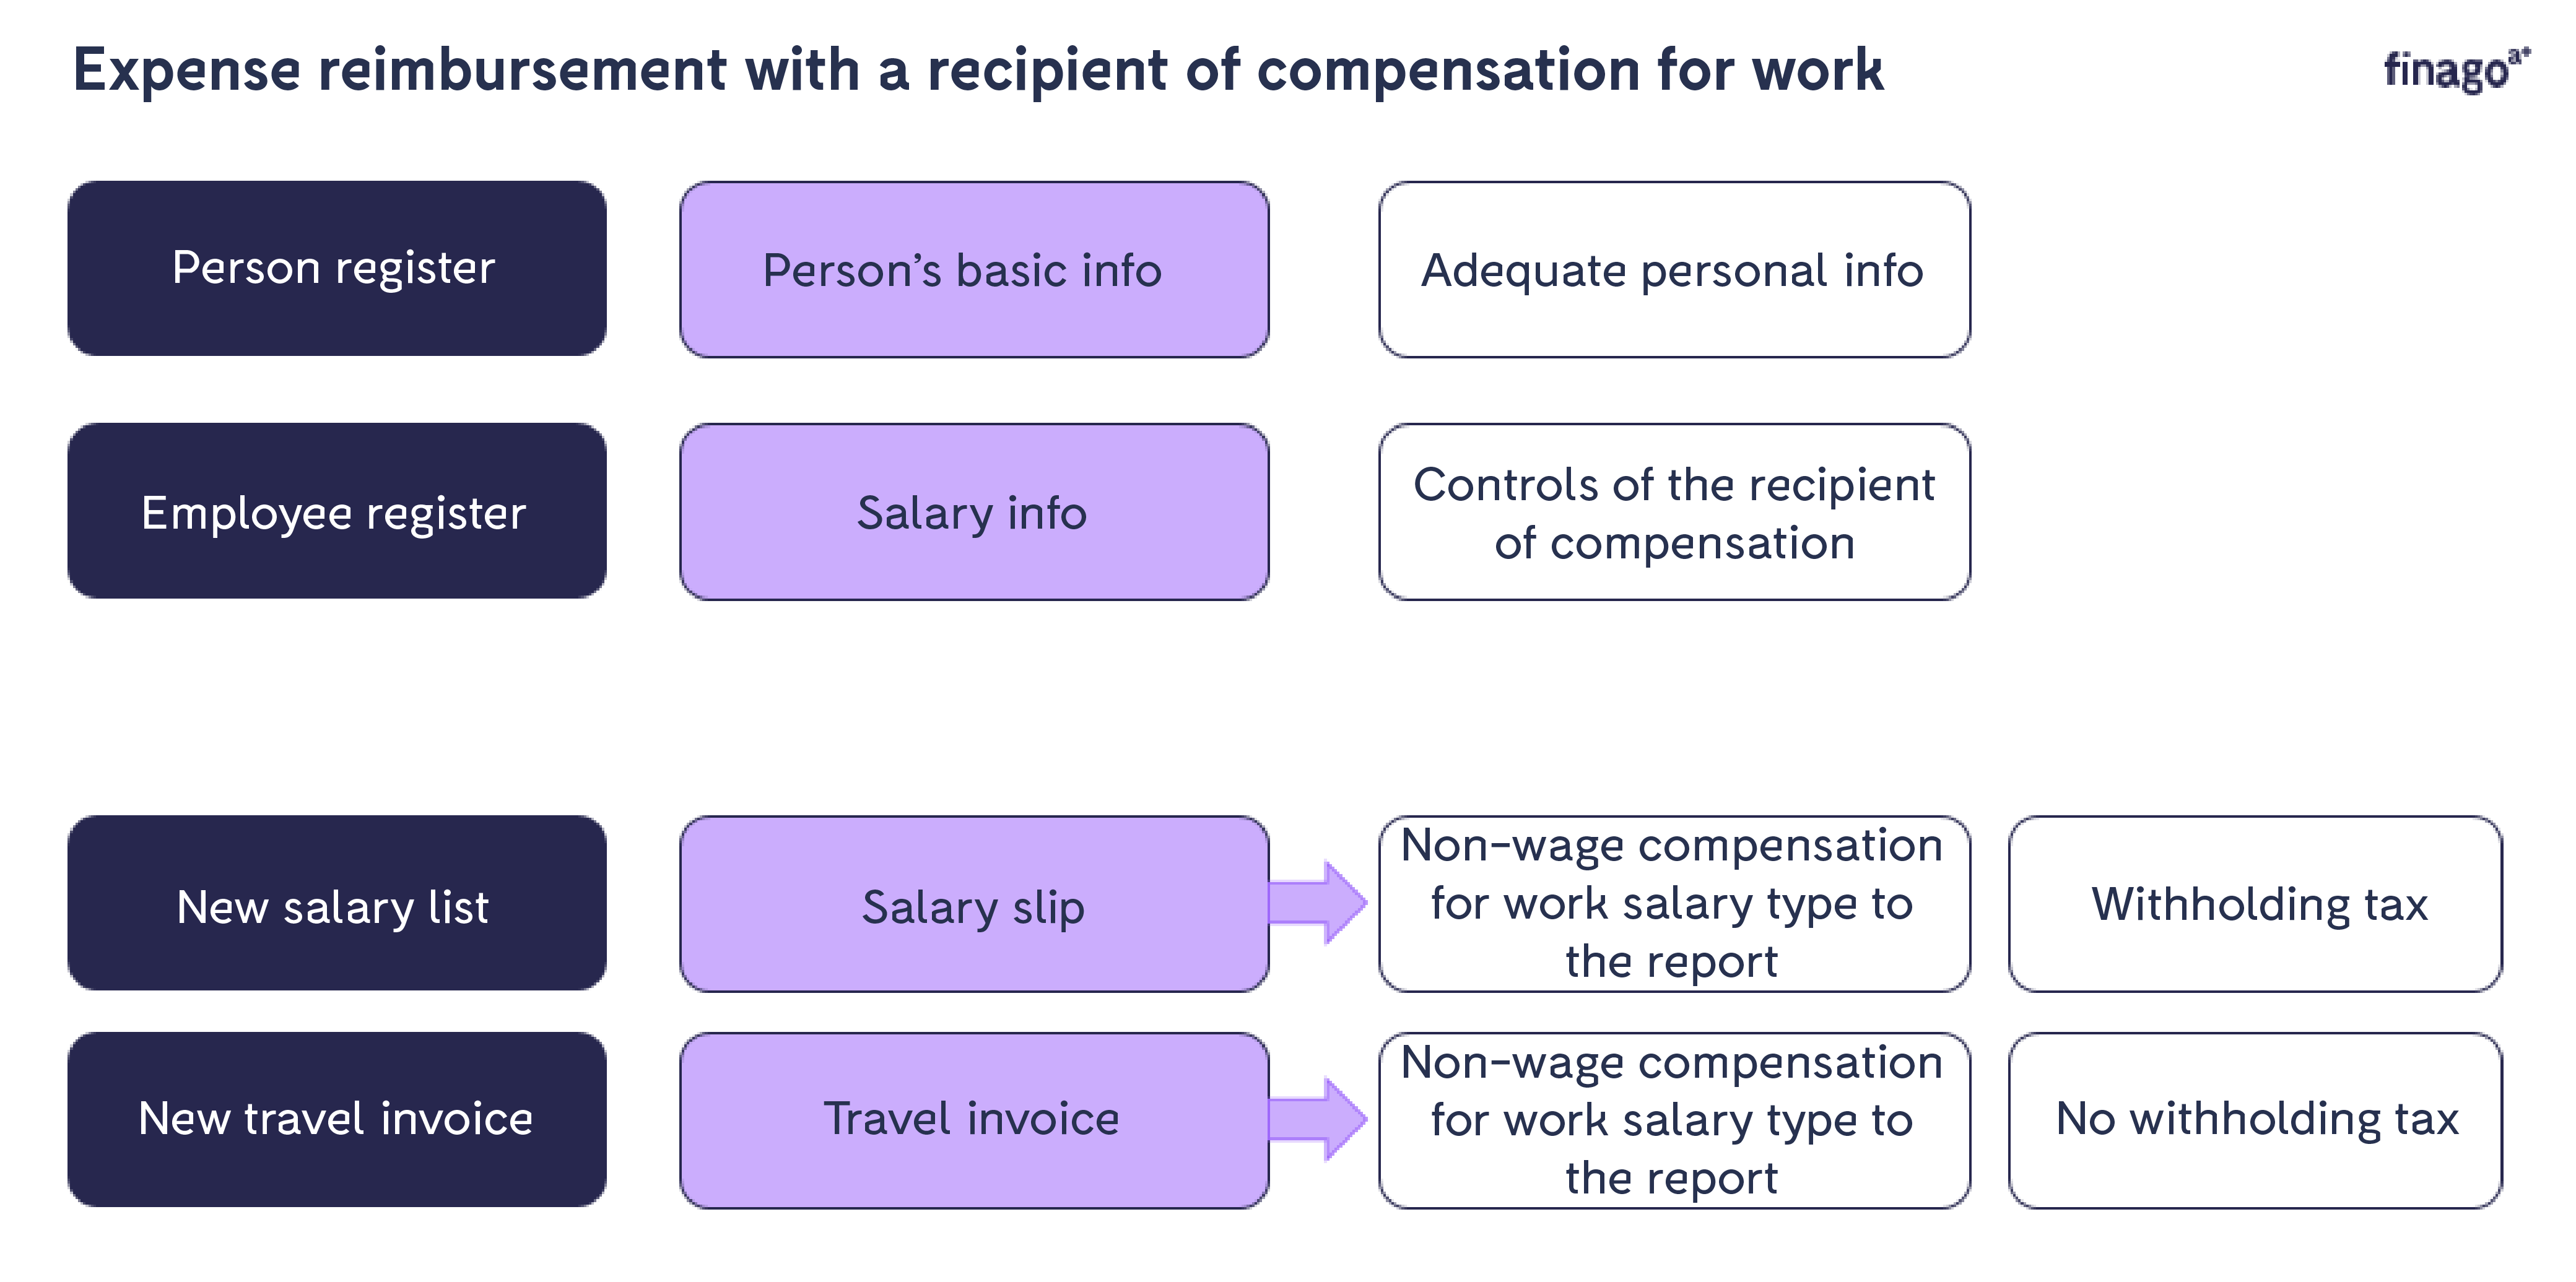 Expense_reimbursement_with_a_recipient_of_compensation_for_work_1.png